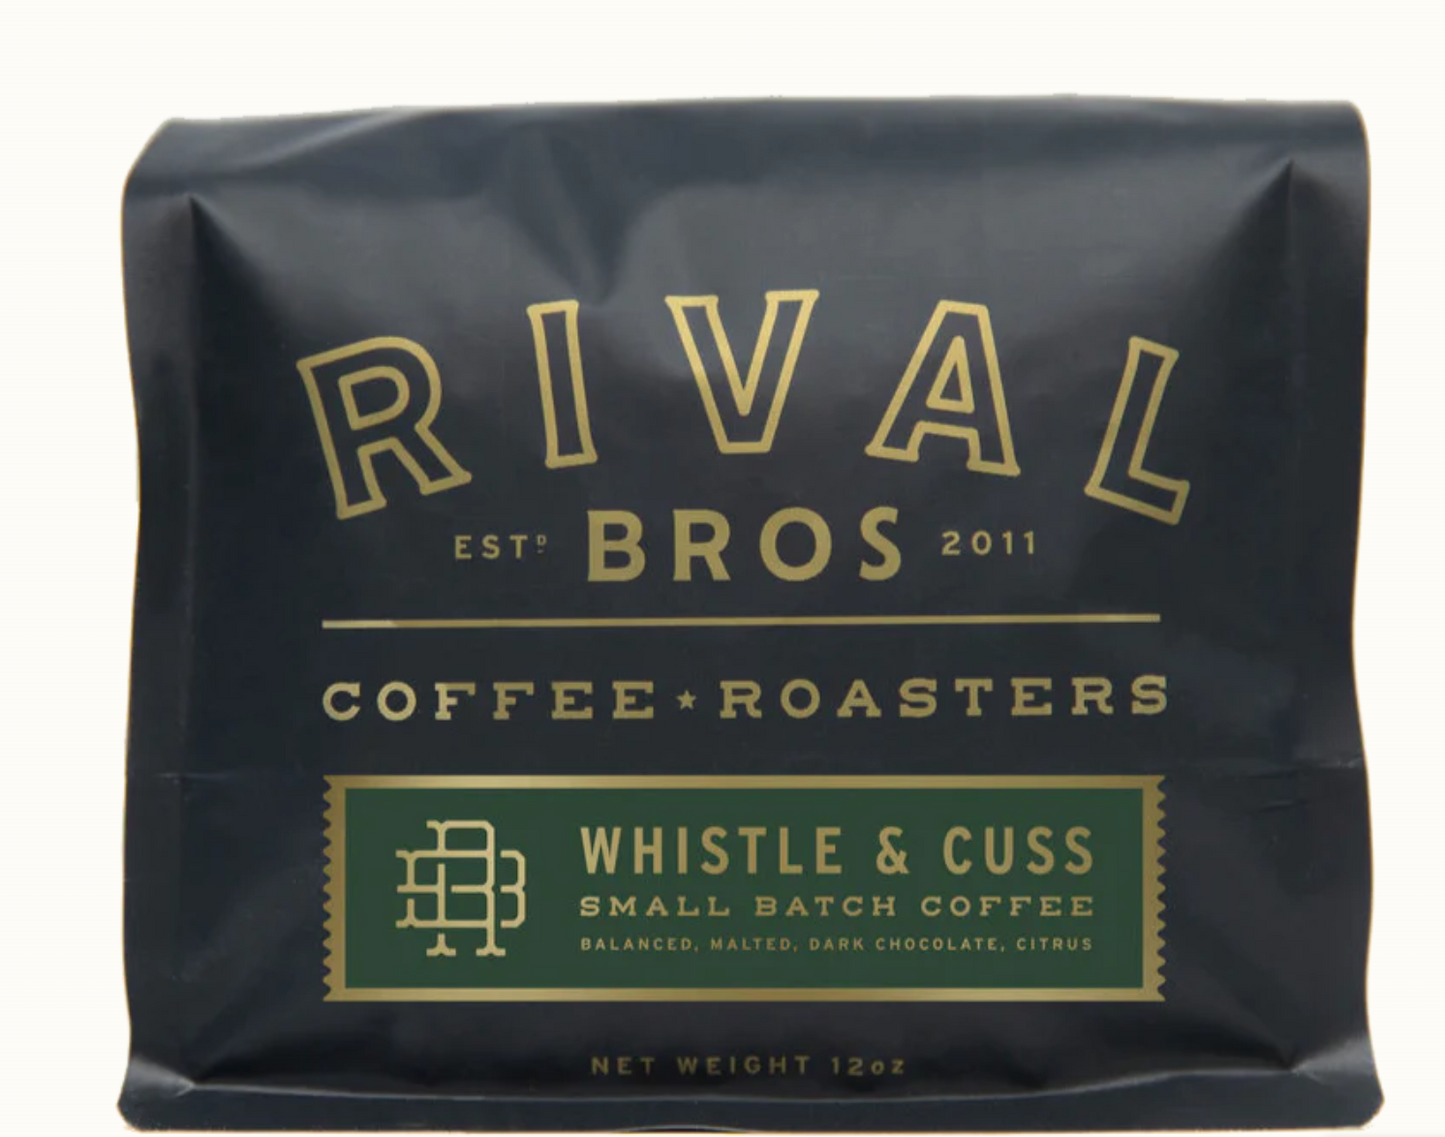 Rival Bro's Coffee - Whistle & Cuss Blend